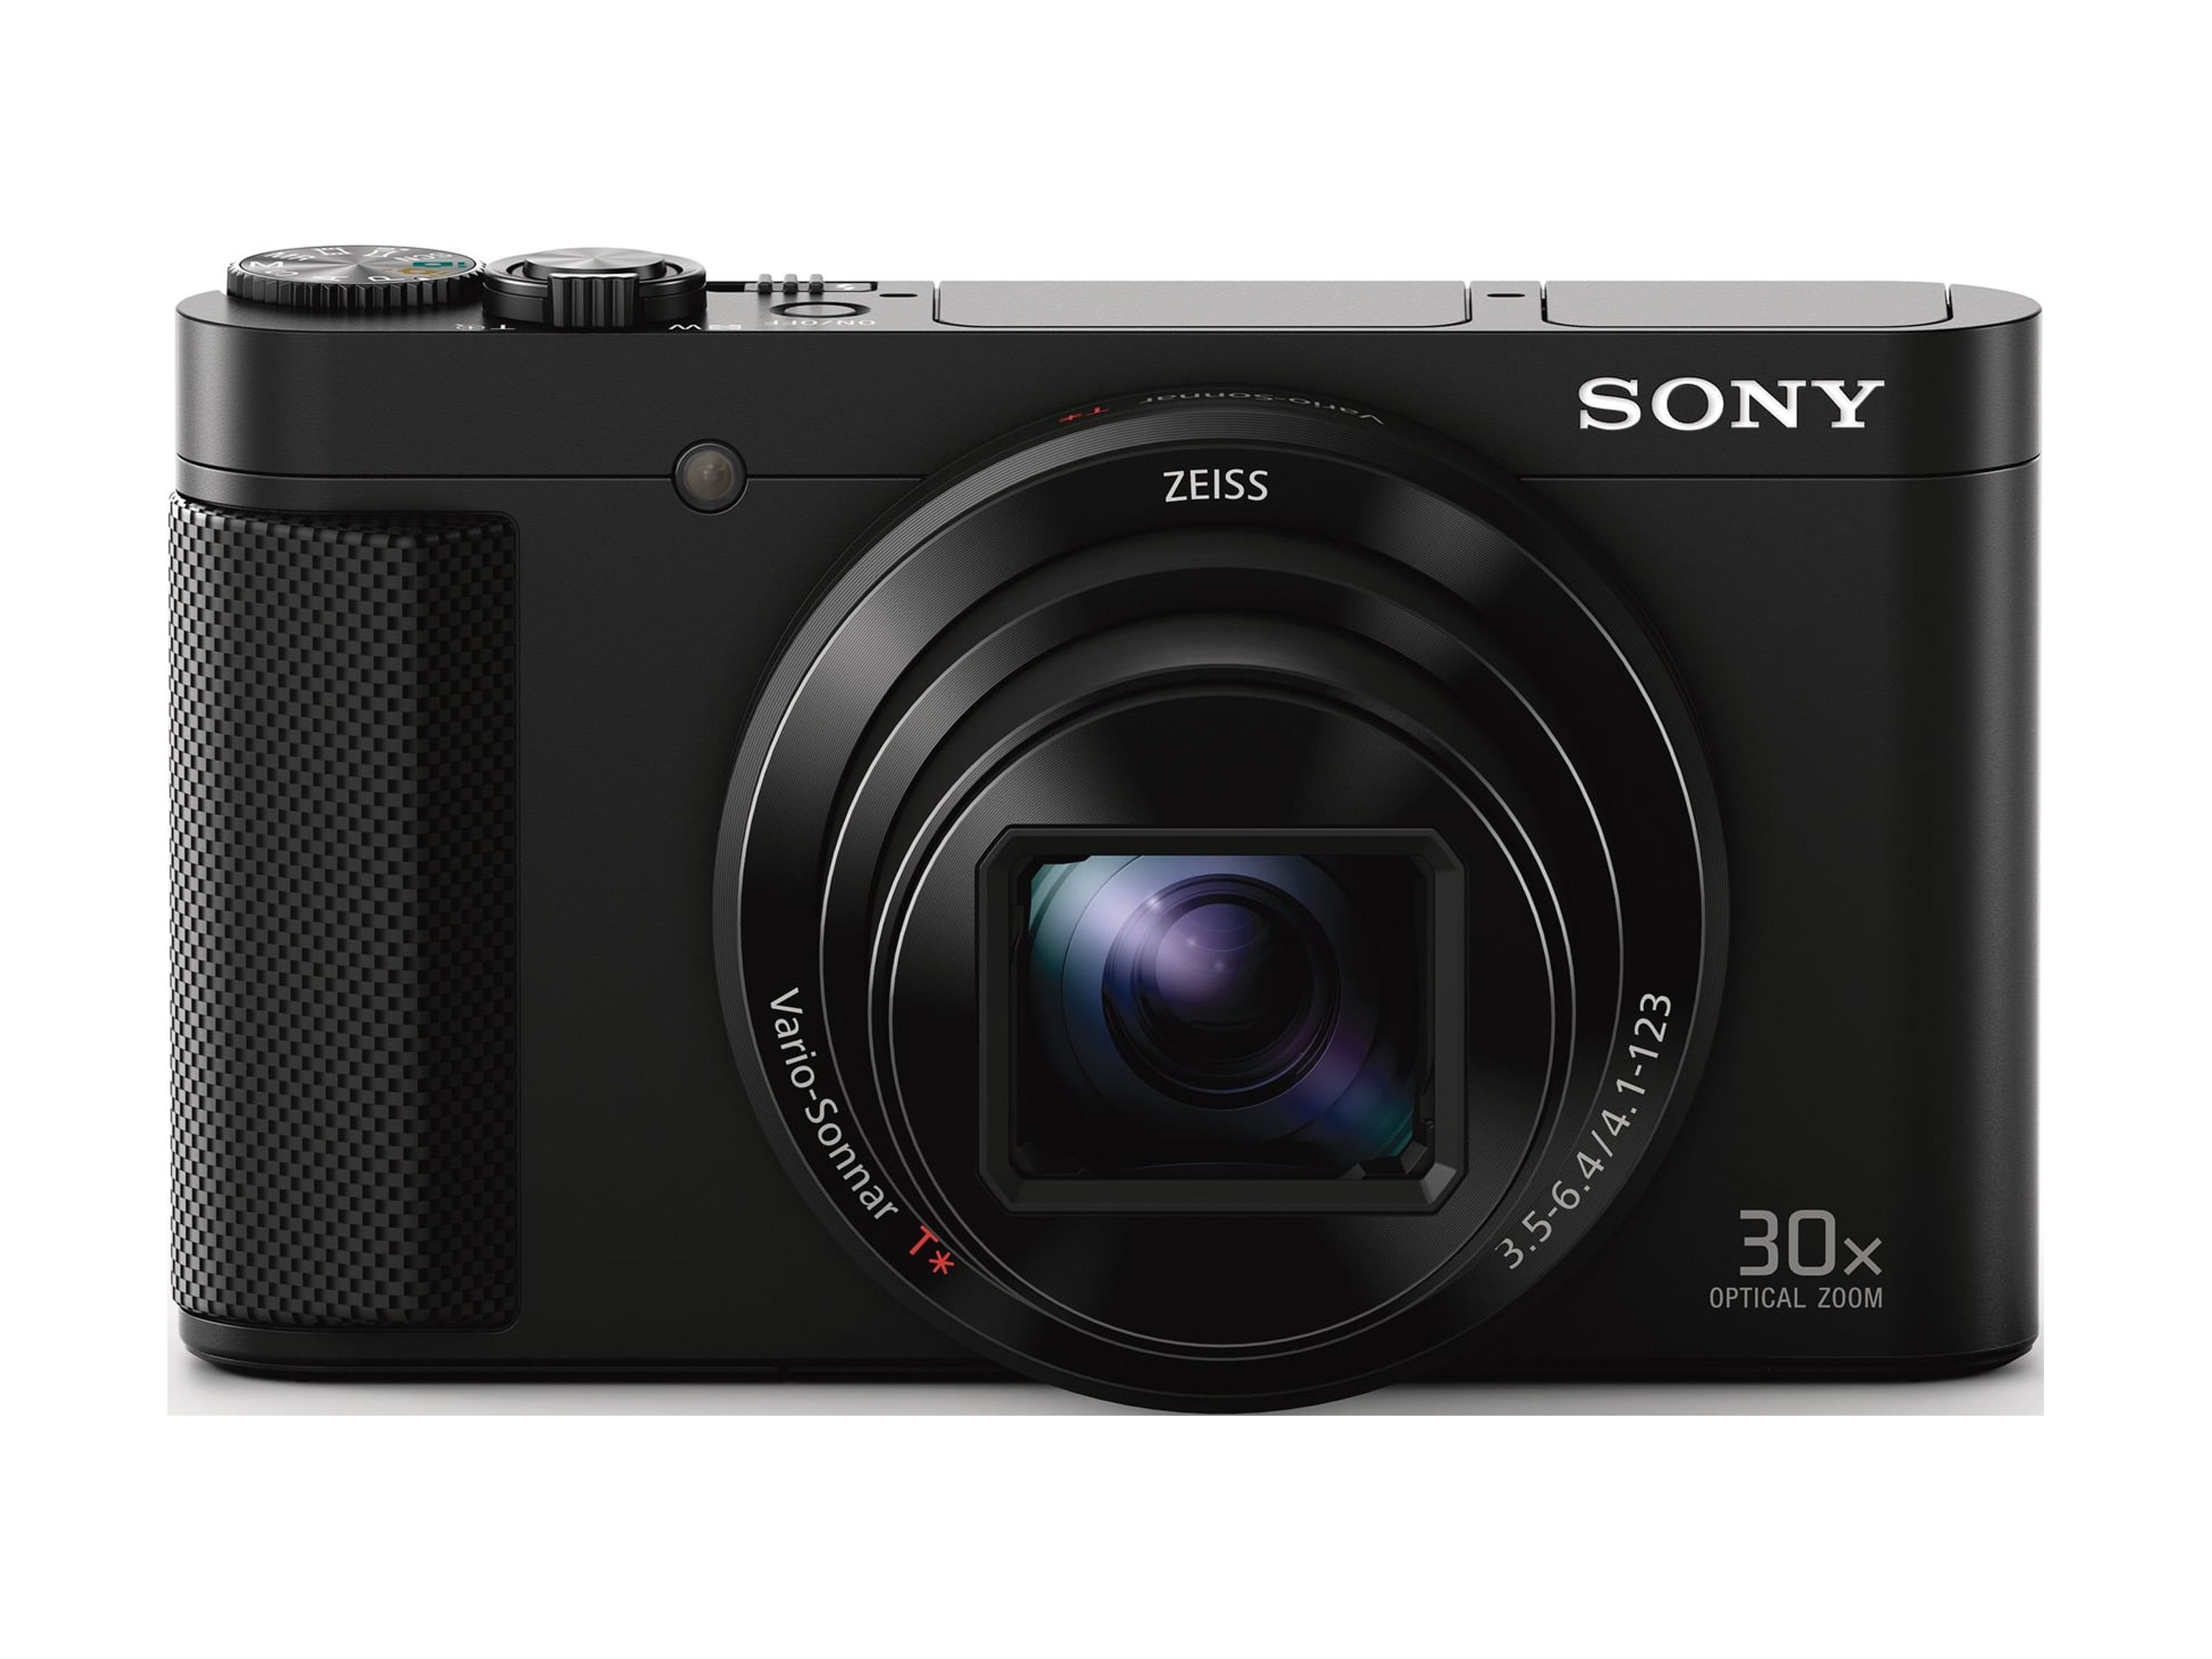 DSC-HX80/B High-zoom Point and Shoot Camera - image 1 of 9